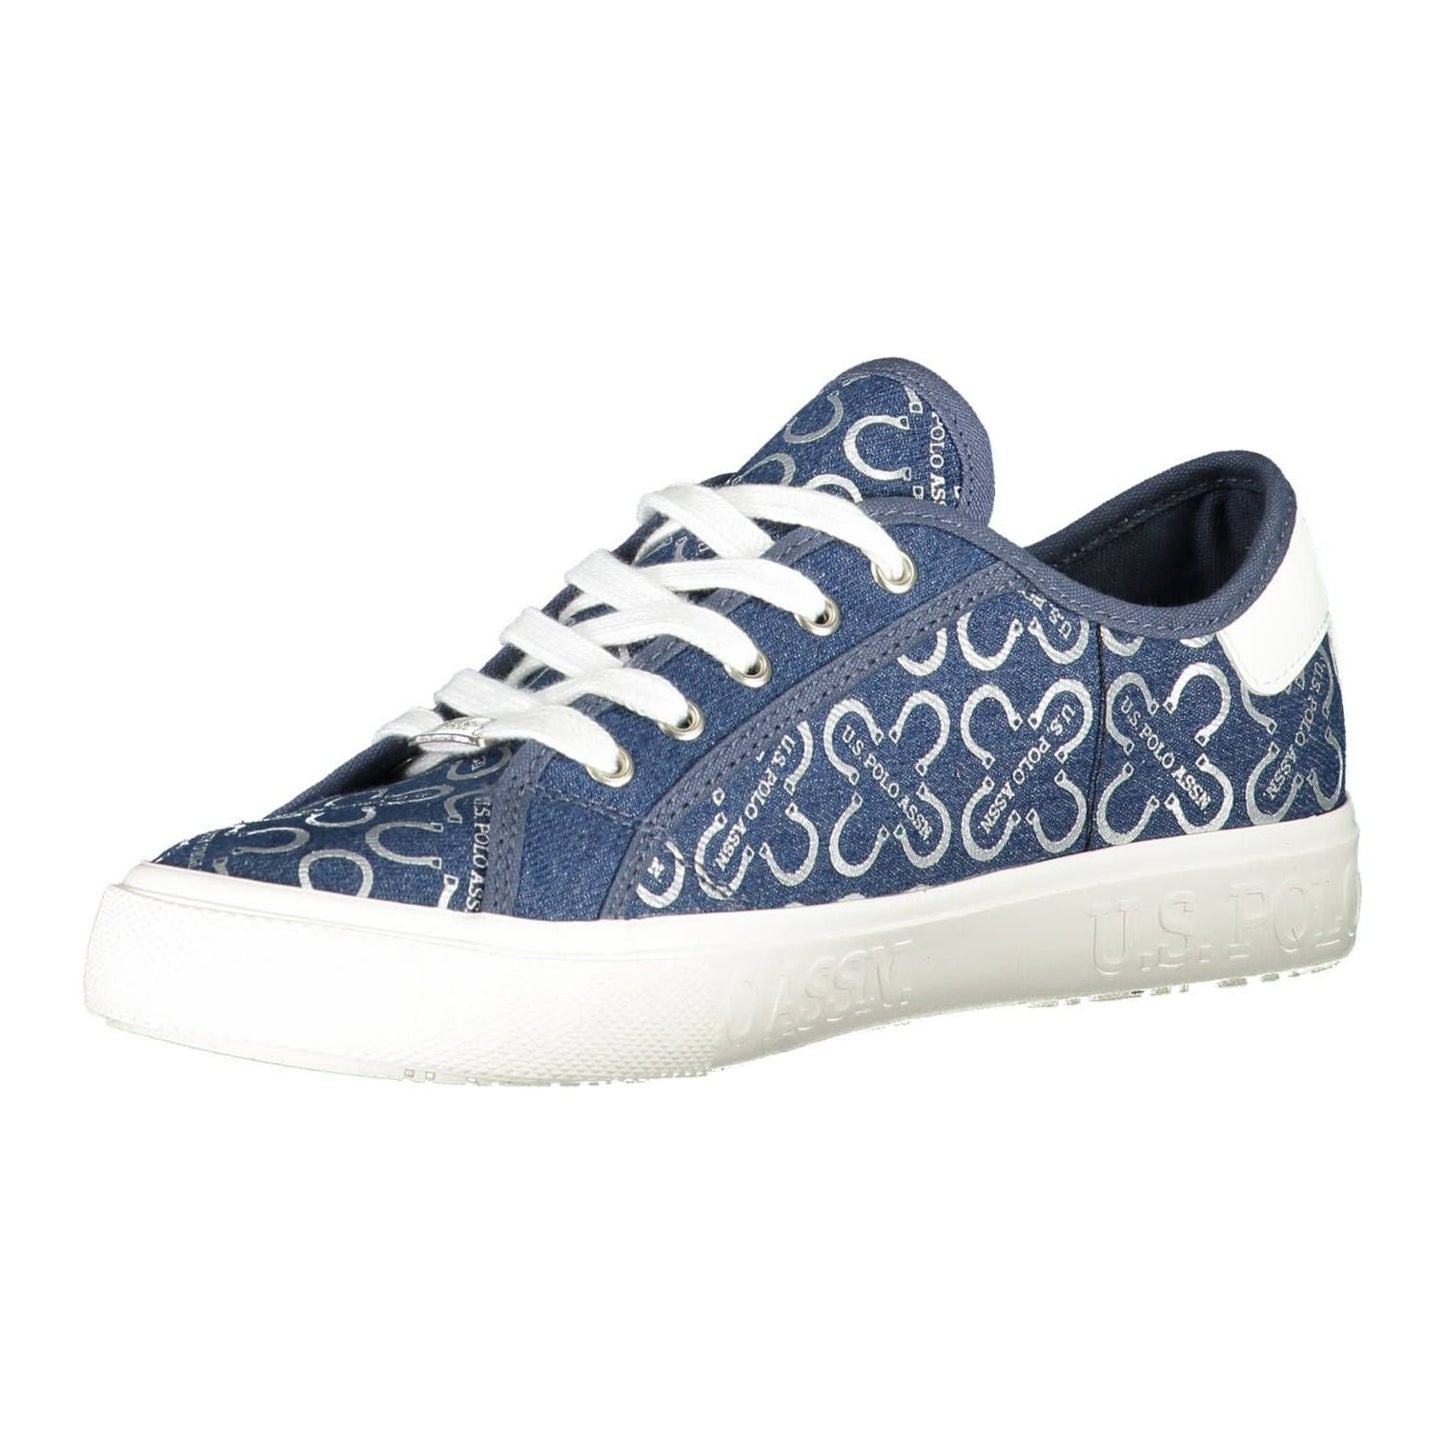 Chic Blue Lace-Up Sports Sneakers